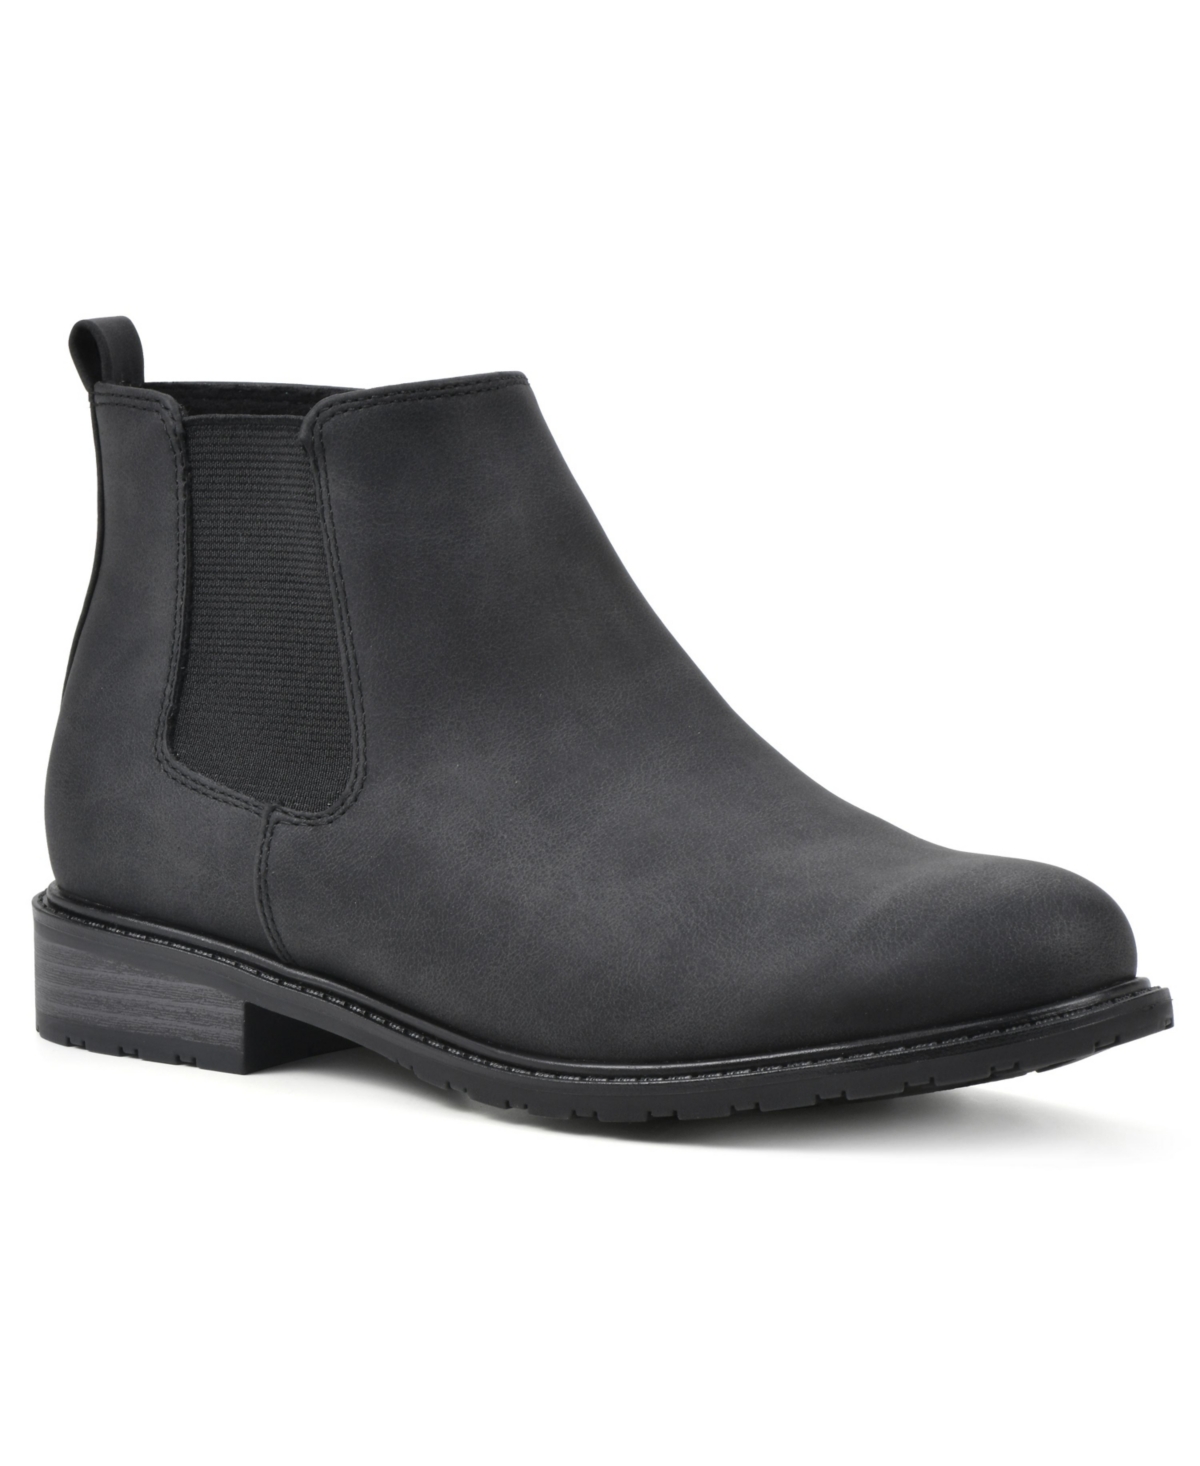 Women's Caching Ankle Booties - Black Smooth